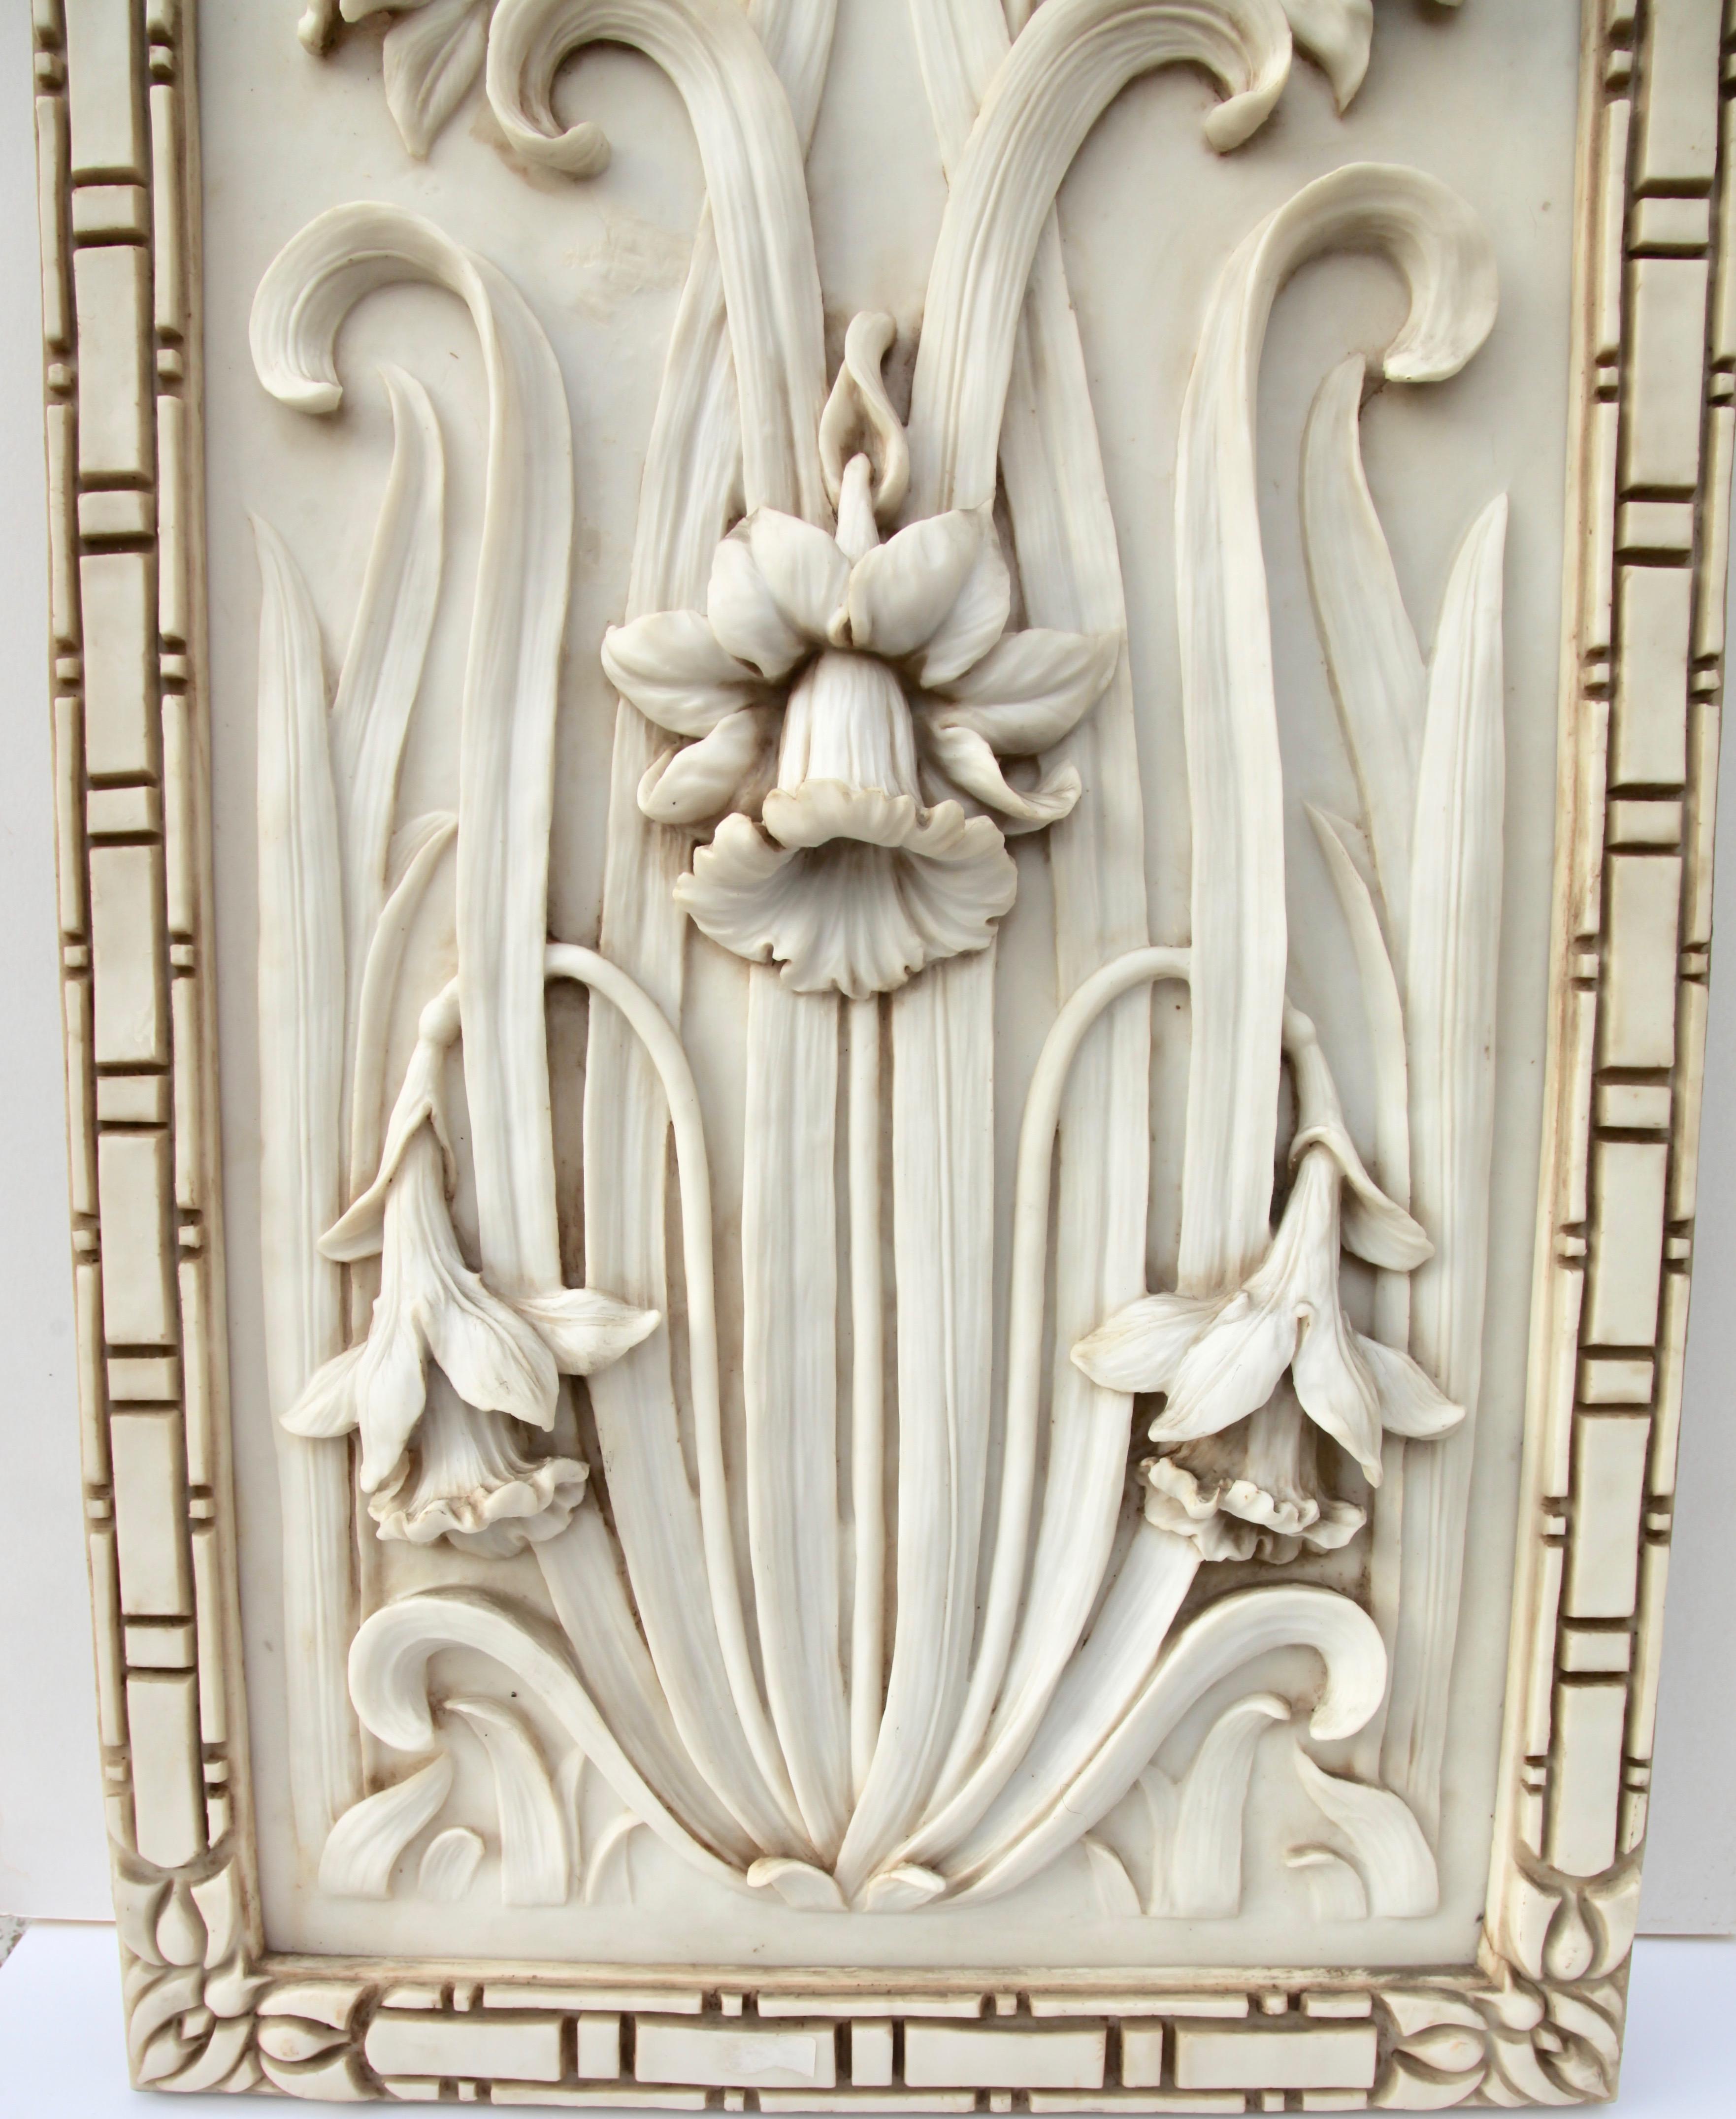 Large decorative alabaster panel with Art Nouveau design. Dramatic high-relief sculpture of daffodils (Jonquils) with leaves and flower heads in 3-D. Such items were typically used as decorative panels in the home. The alabaster has a light cream